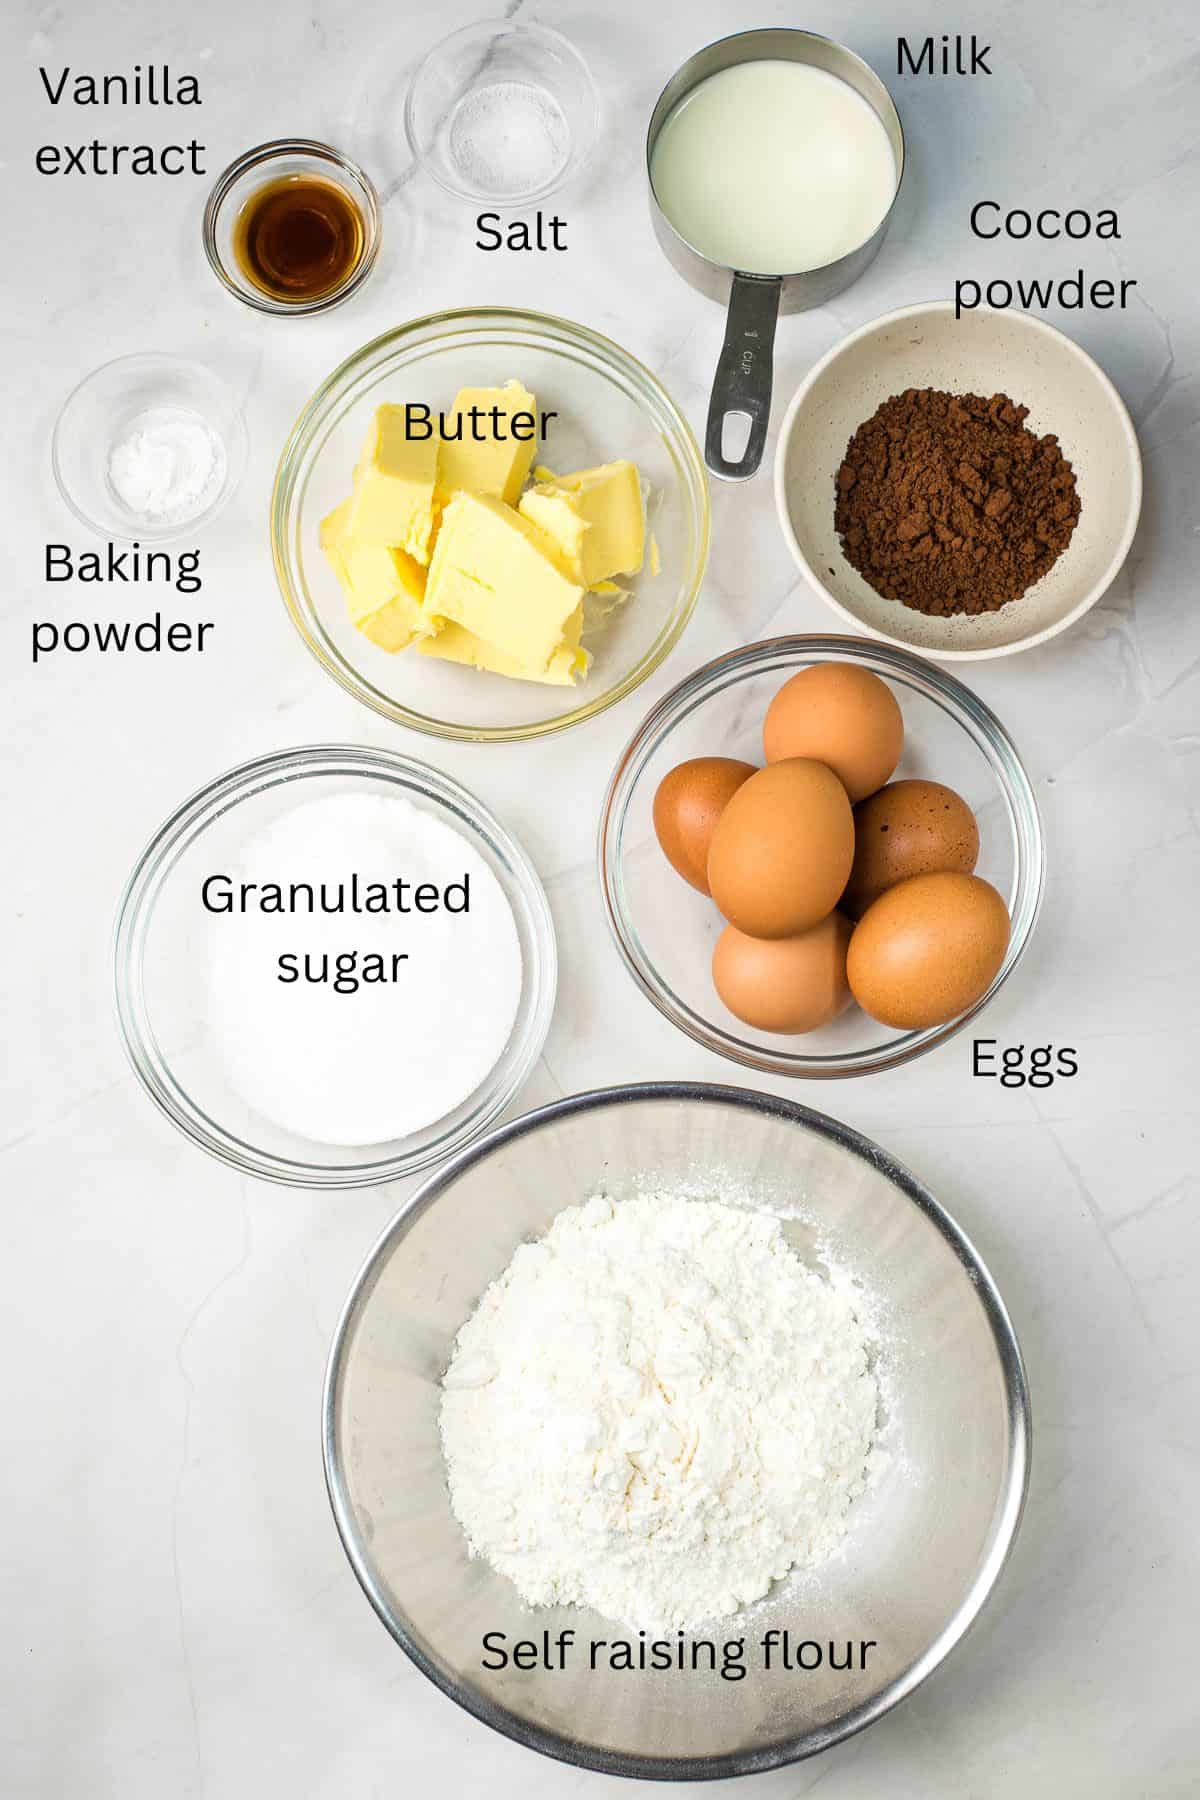 Self raising flour, granulated sugar, eggs, butter, vanilla extract, cocoa powder, salt, baking powder and milk in bowls against marble background.